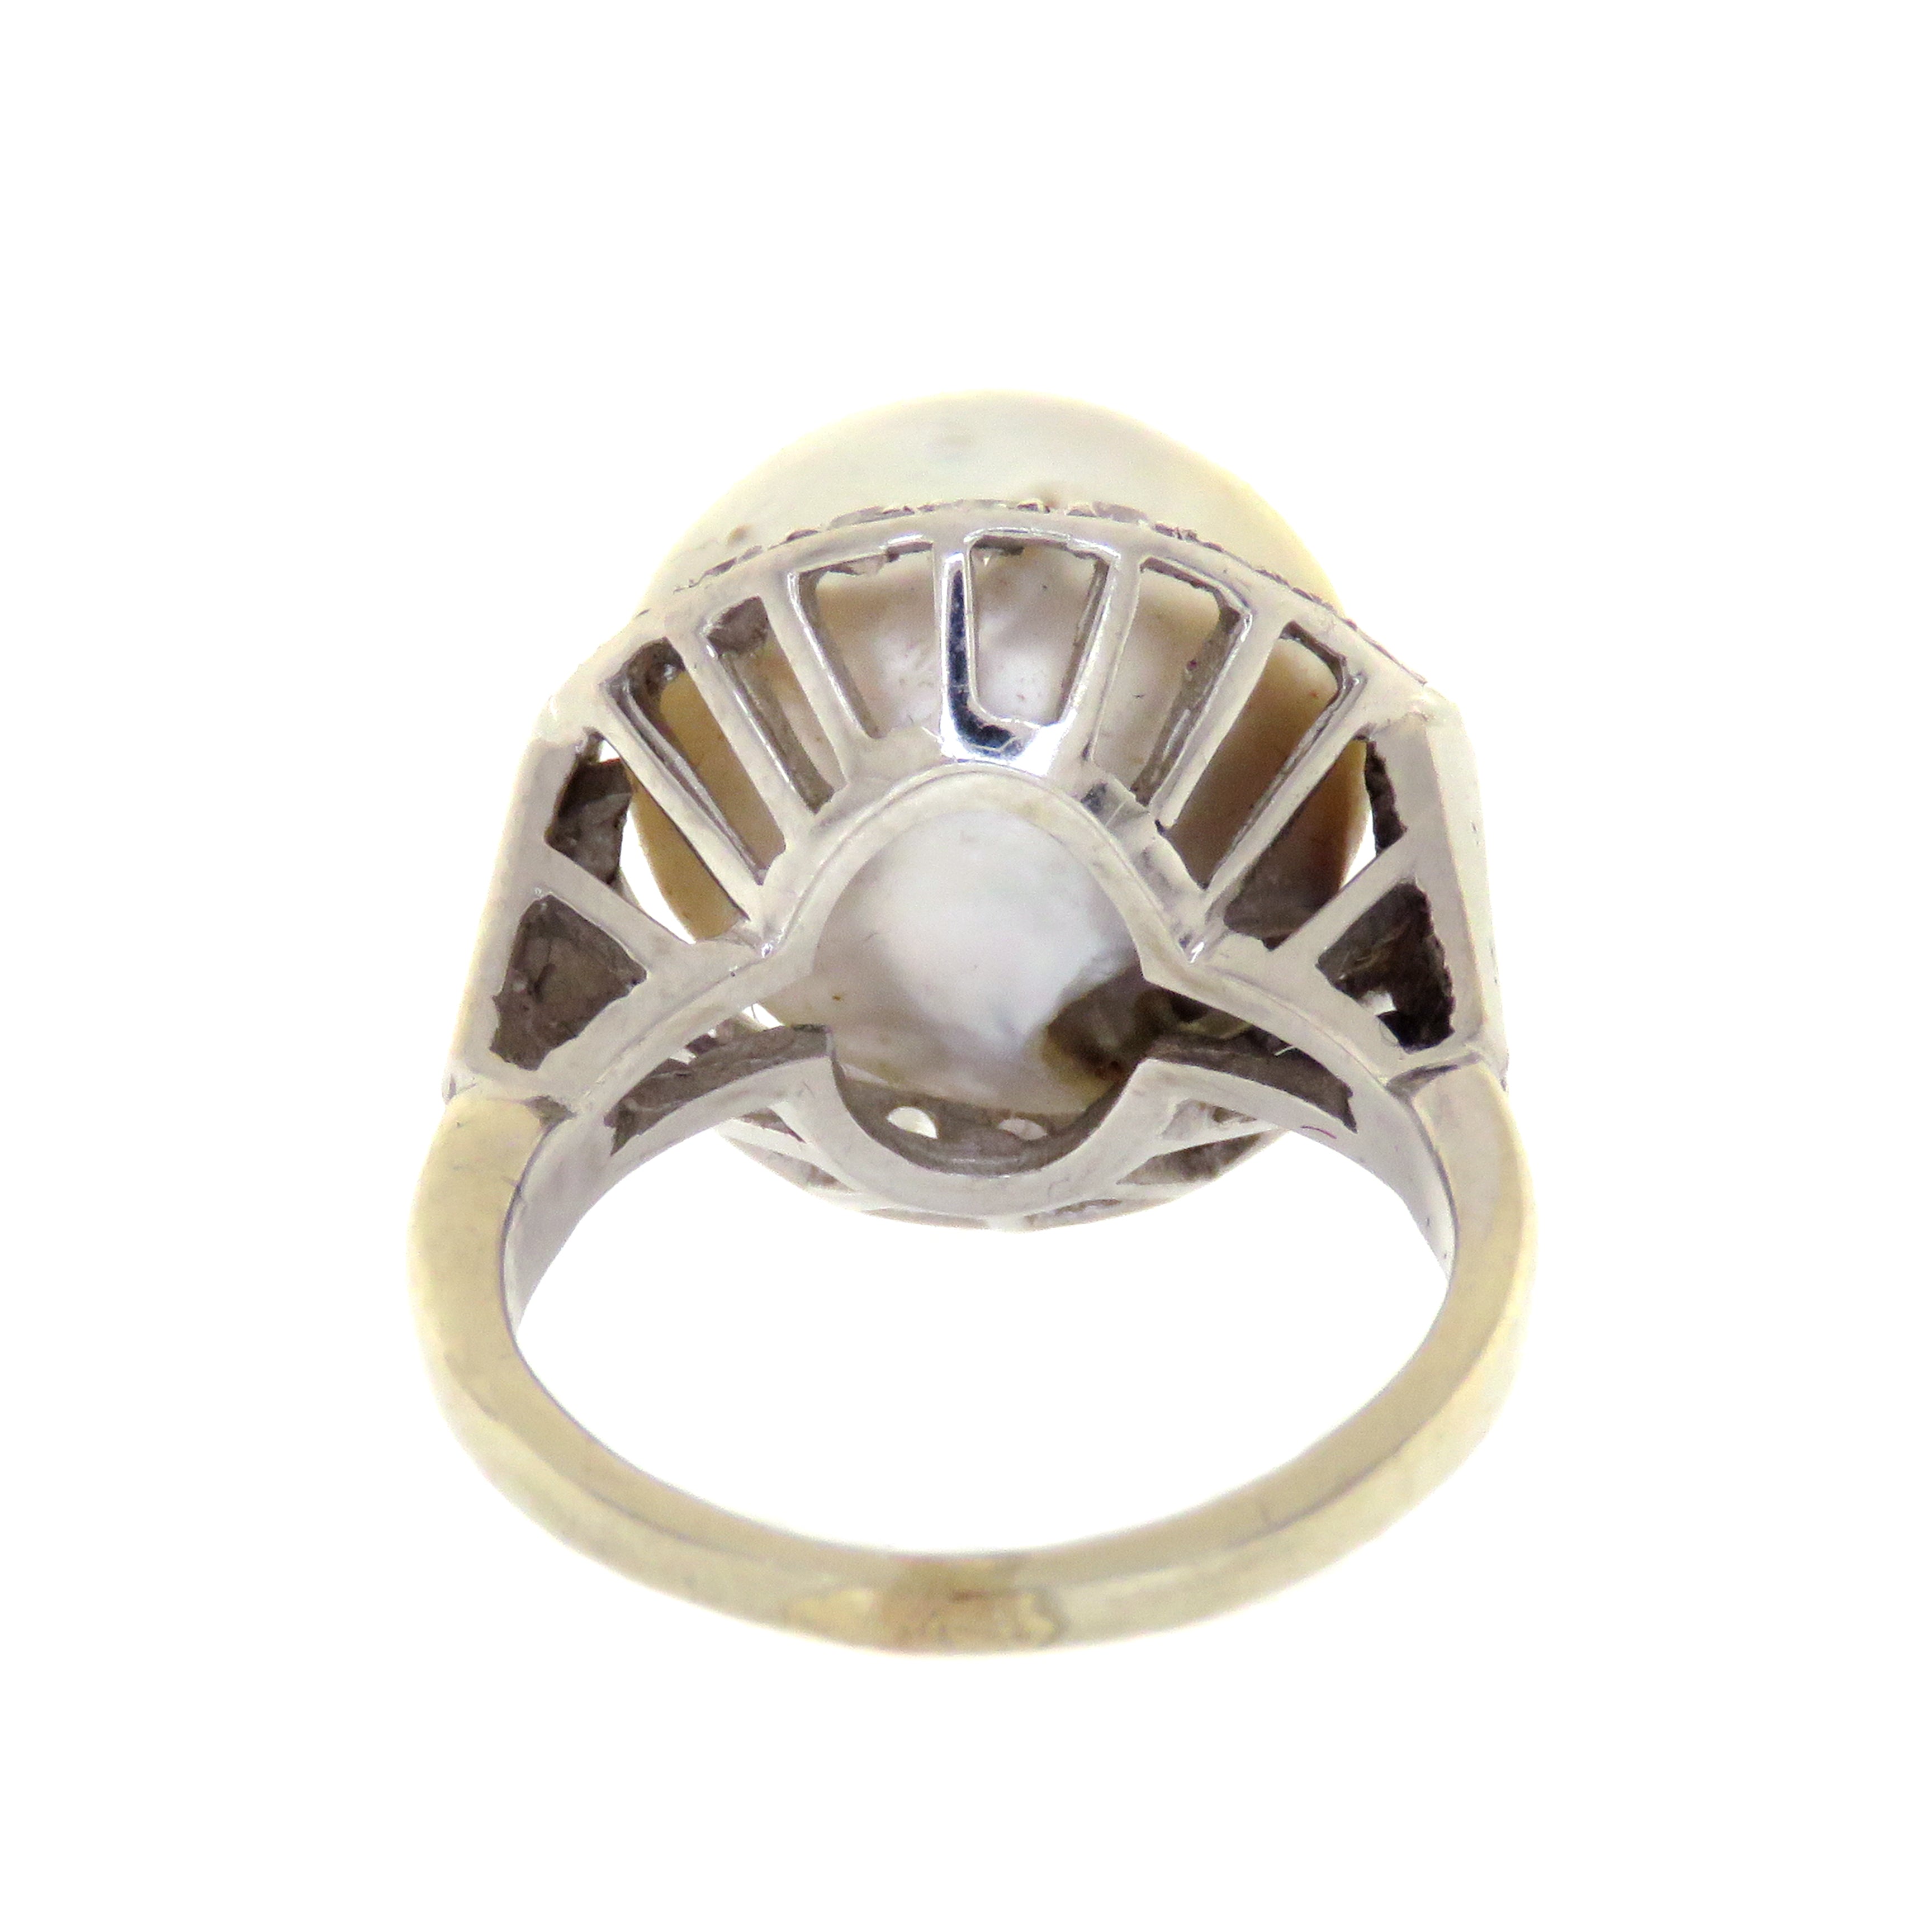 Hold for E⚡️18ct Saltwater Pearl Ring with GIA Report